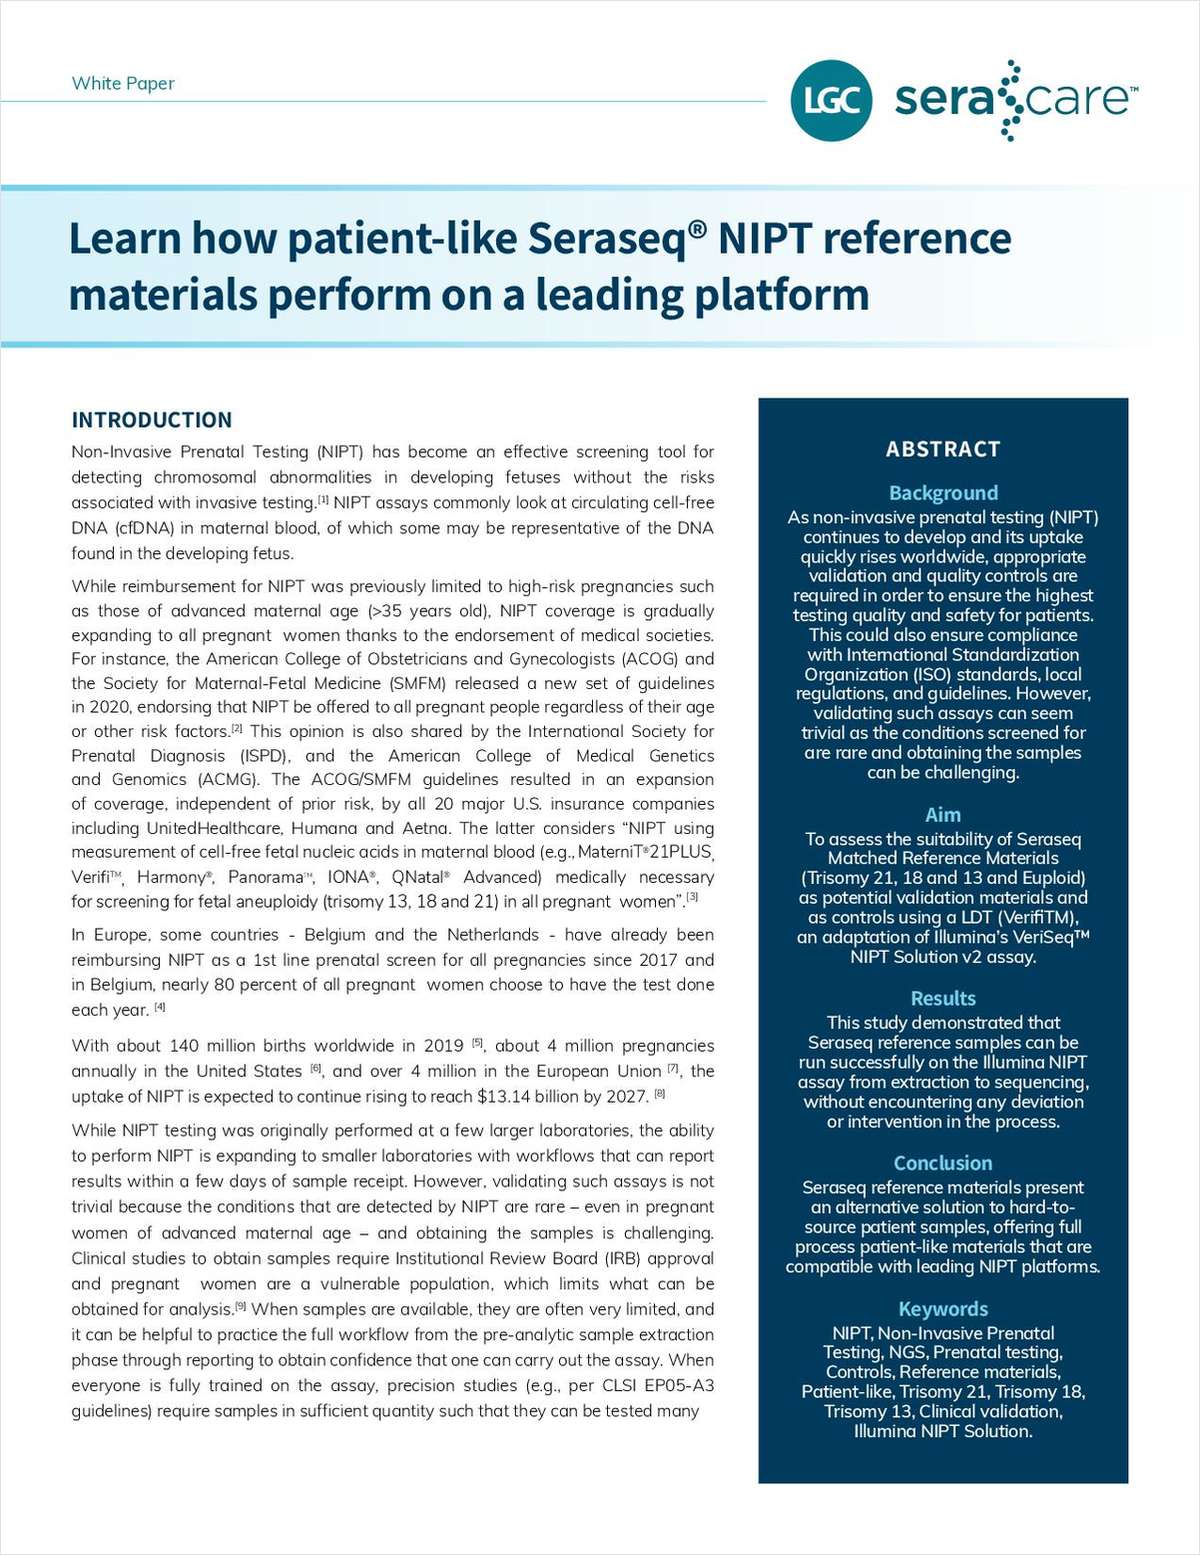 Learn How Patient-Like Seraseq NIPT Reference Materials Perform on a Leading Platform